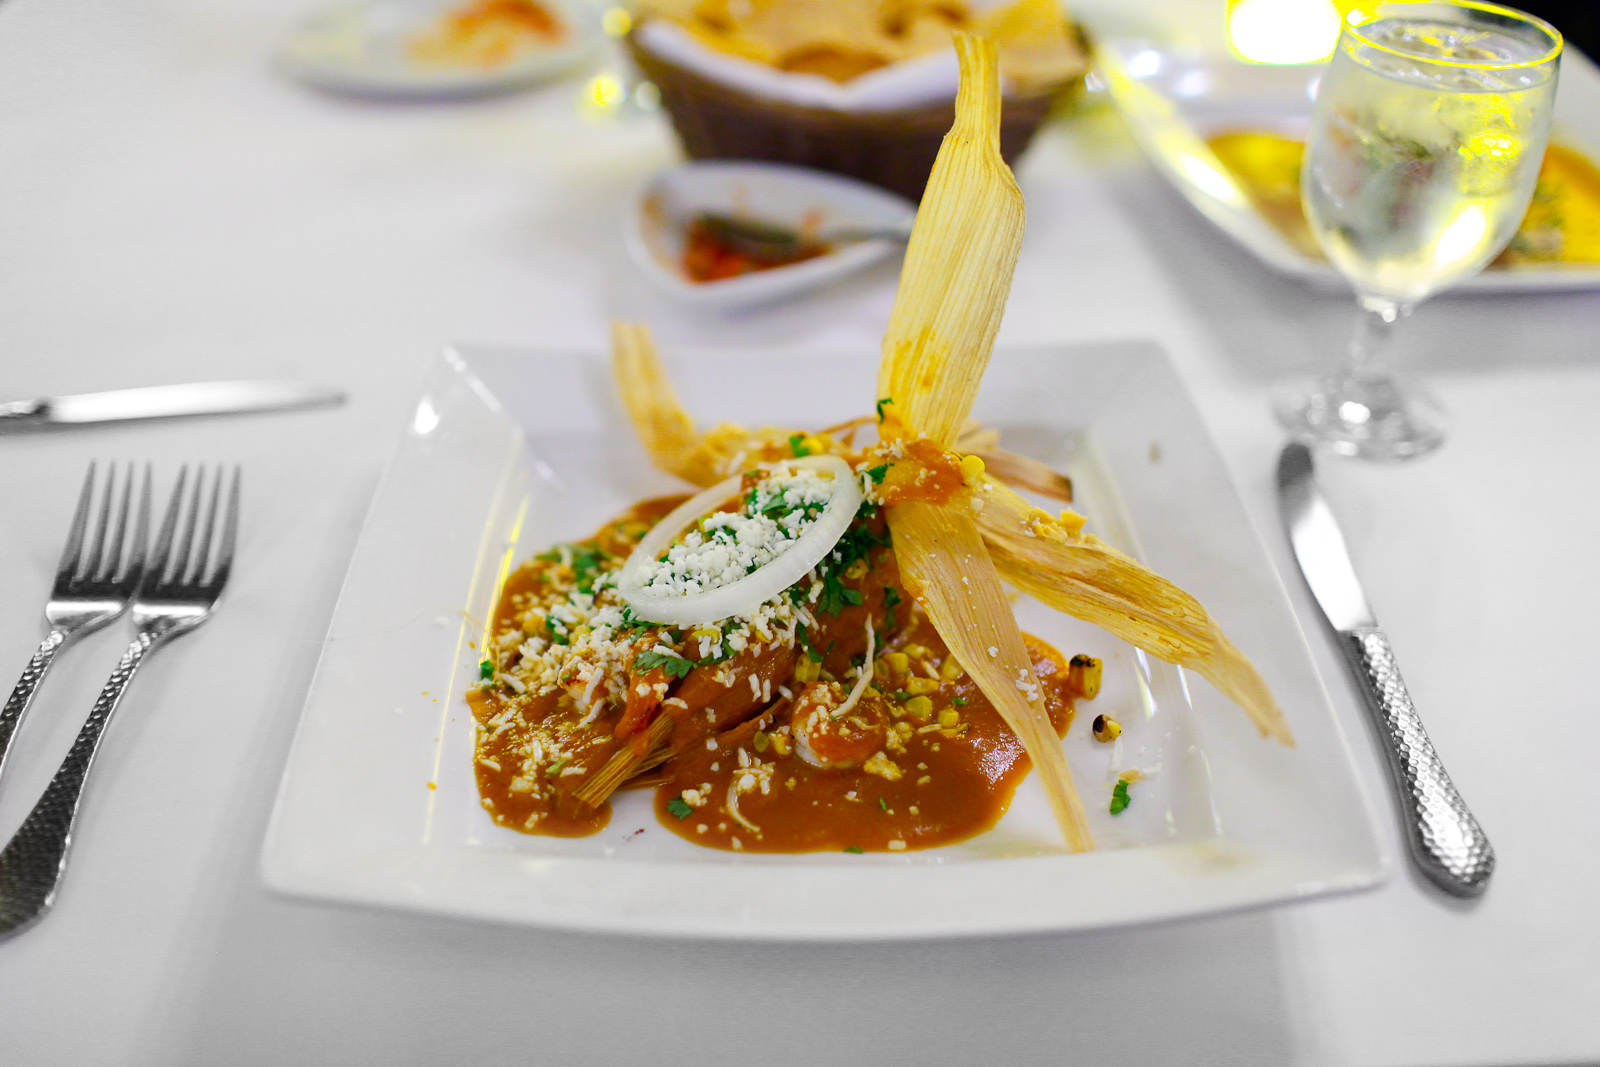 Tamal de elote - fresh corn tamal with seared shrimp, cooked in a chipotle chile cream ($11)